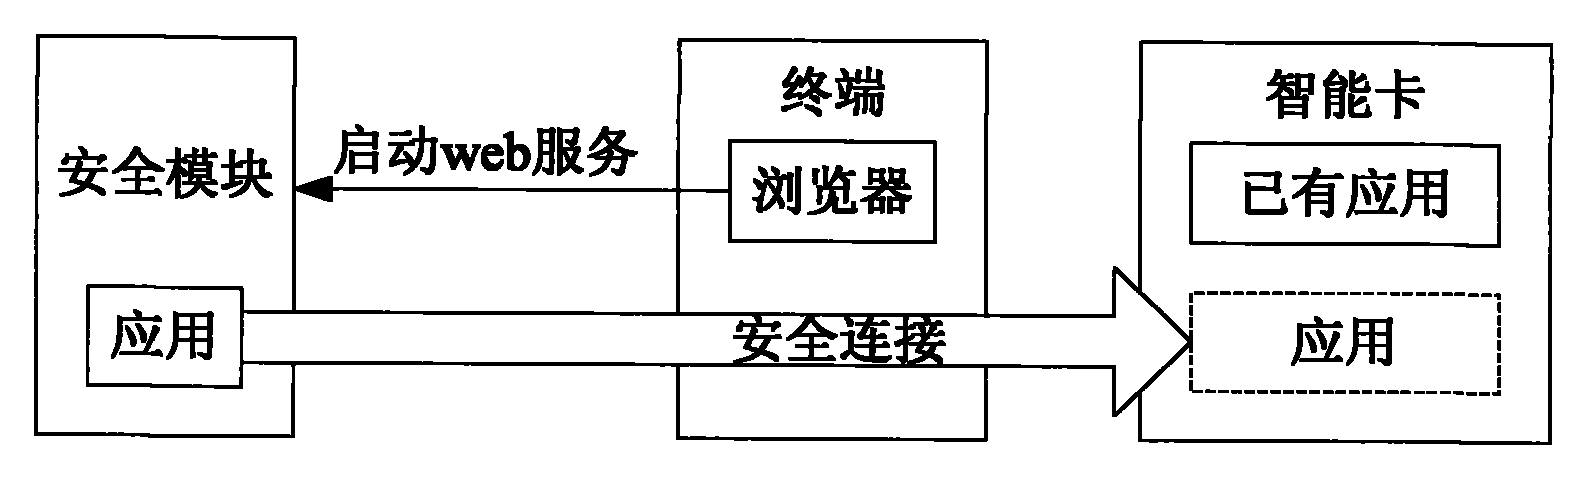 Method and system for deploying application of smart card, and security module